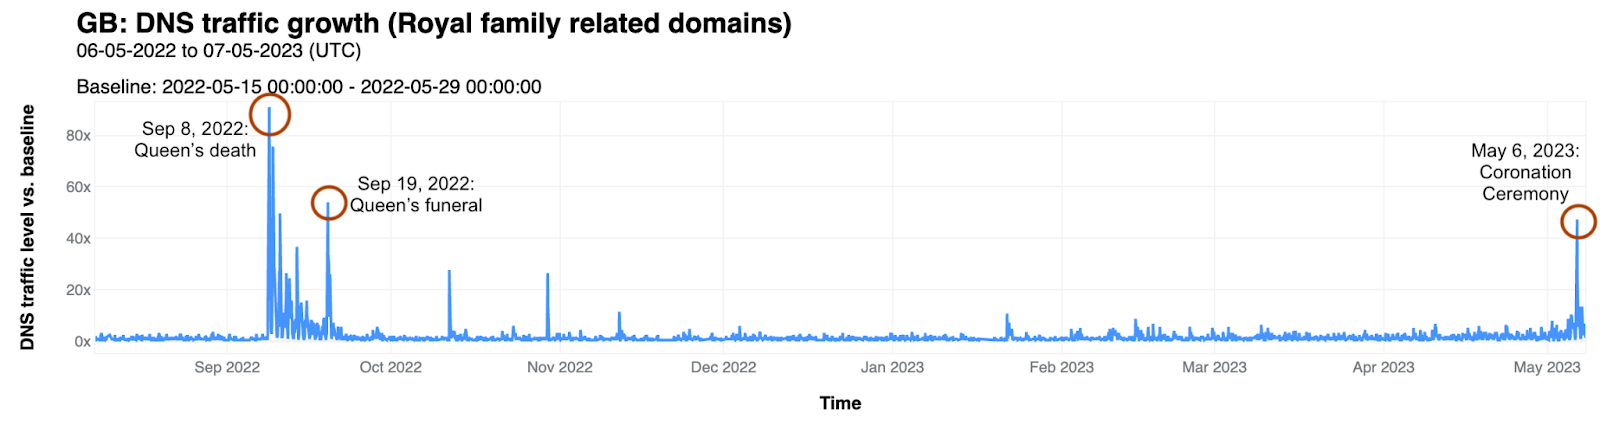 How the coronation of King Charles III affected Internet traffic